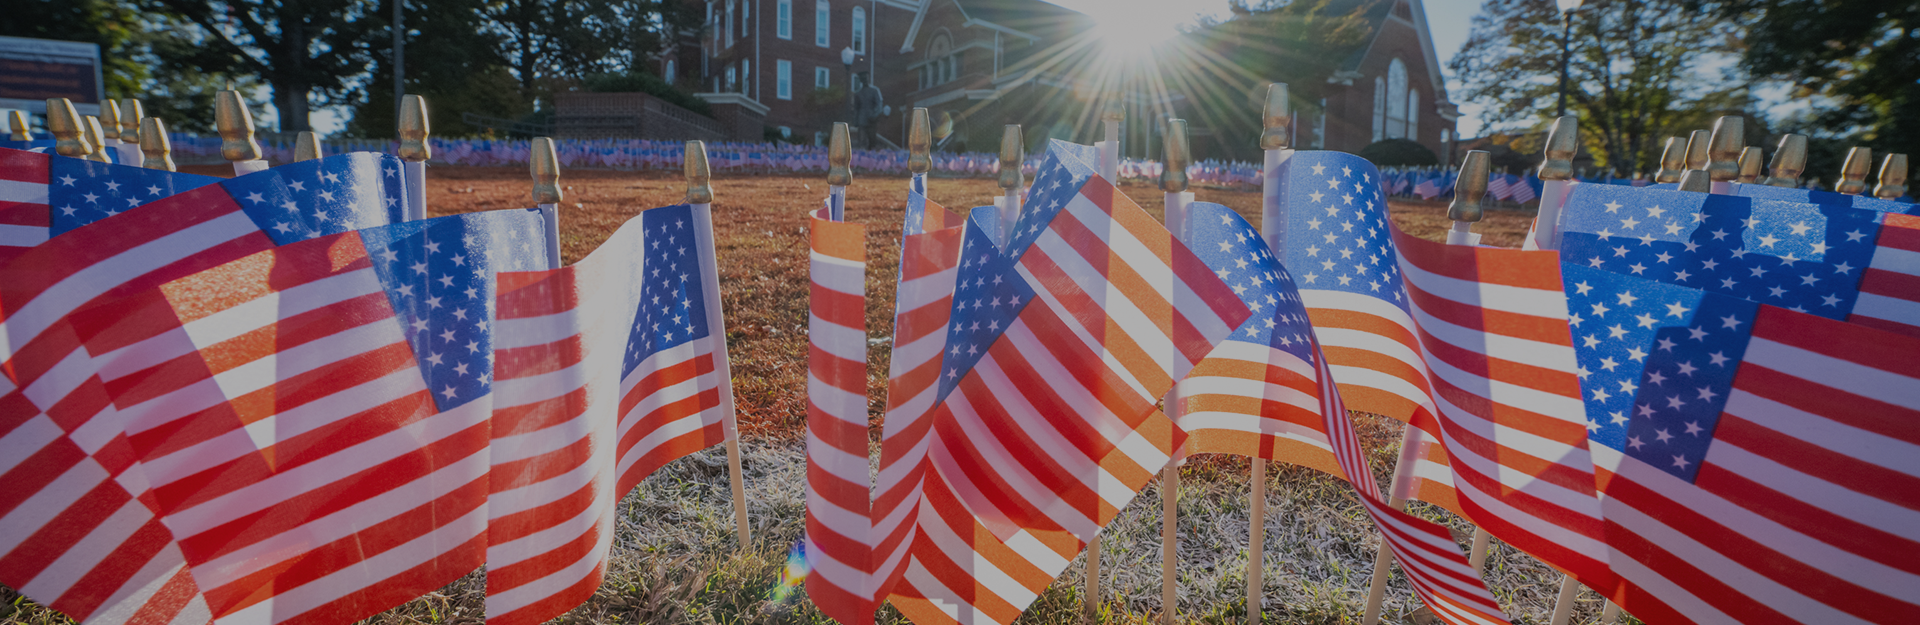 US flags on Bowman field at Clemson University.